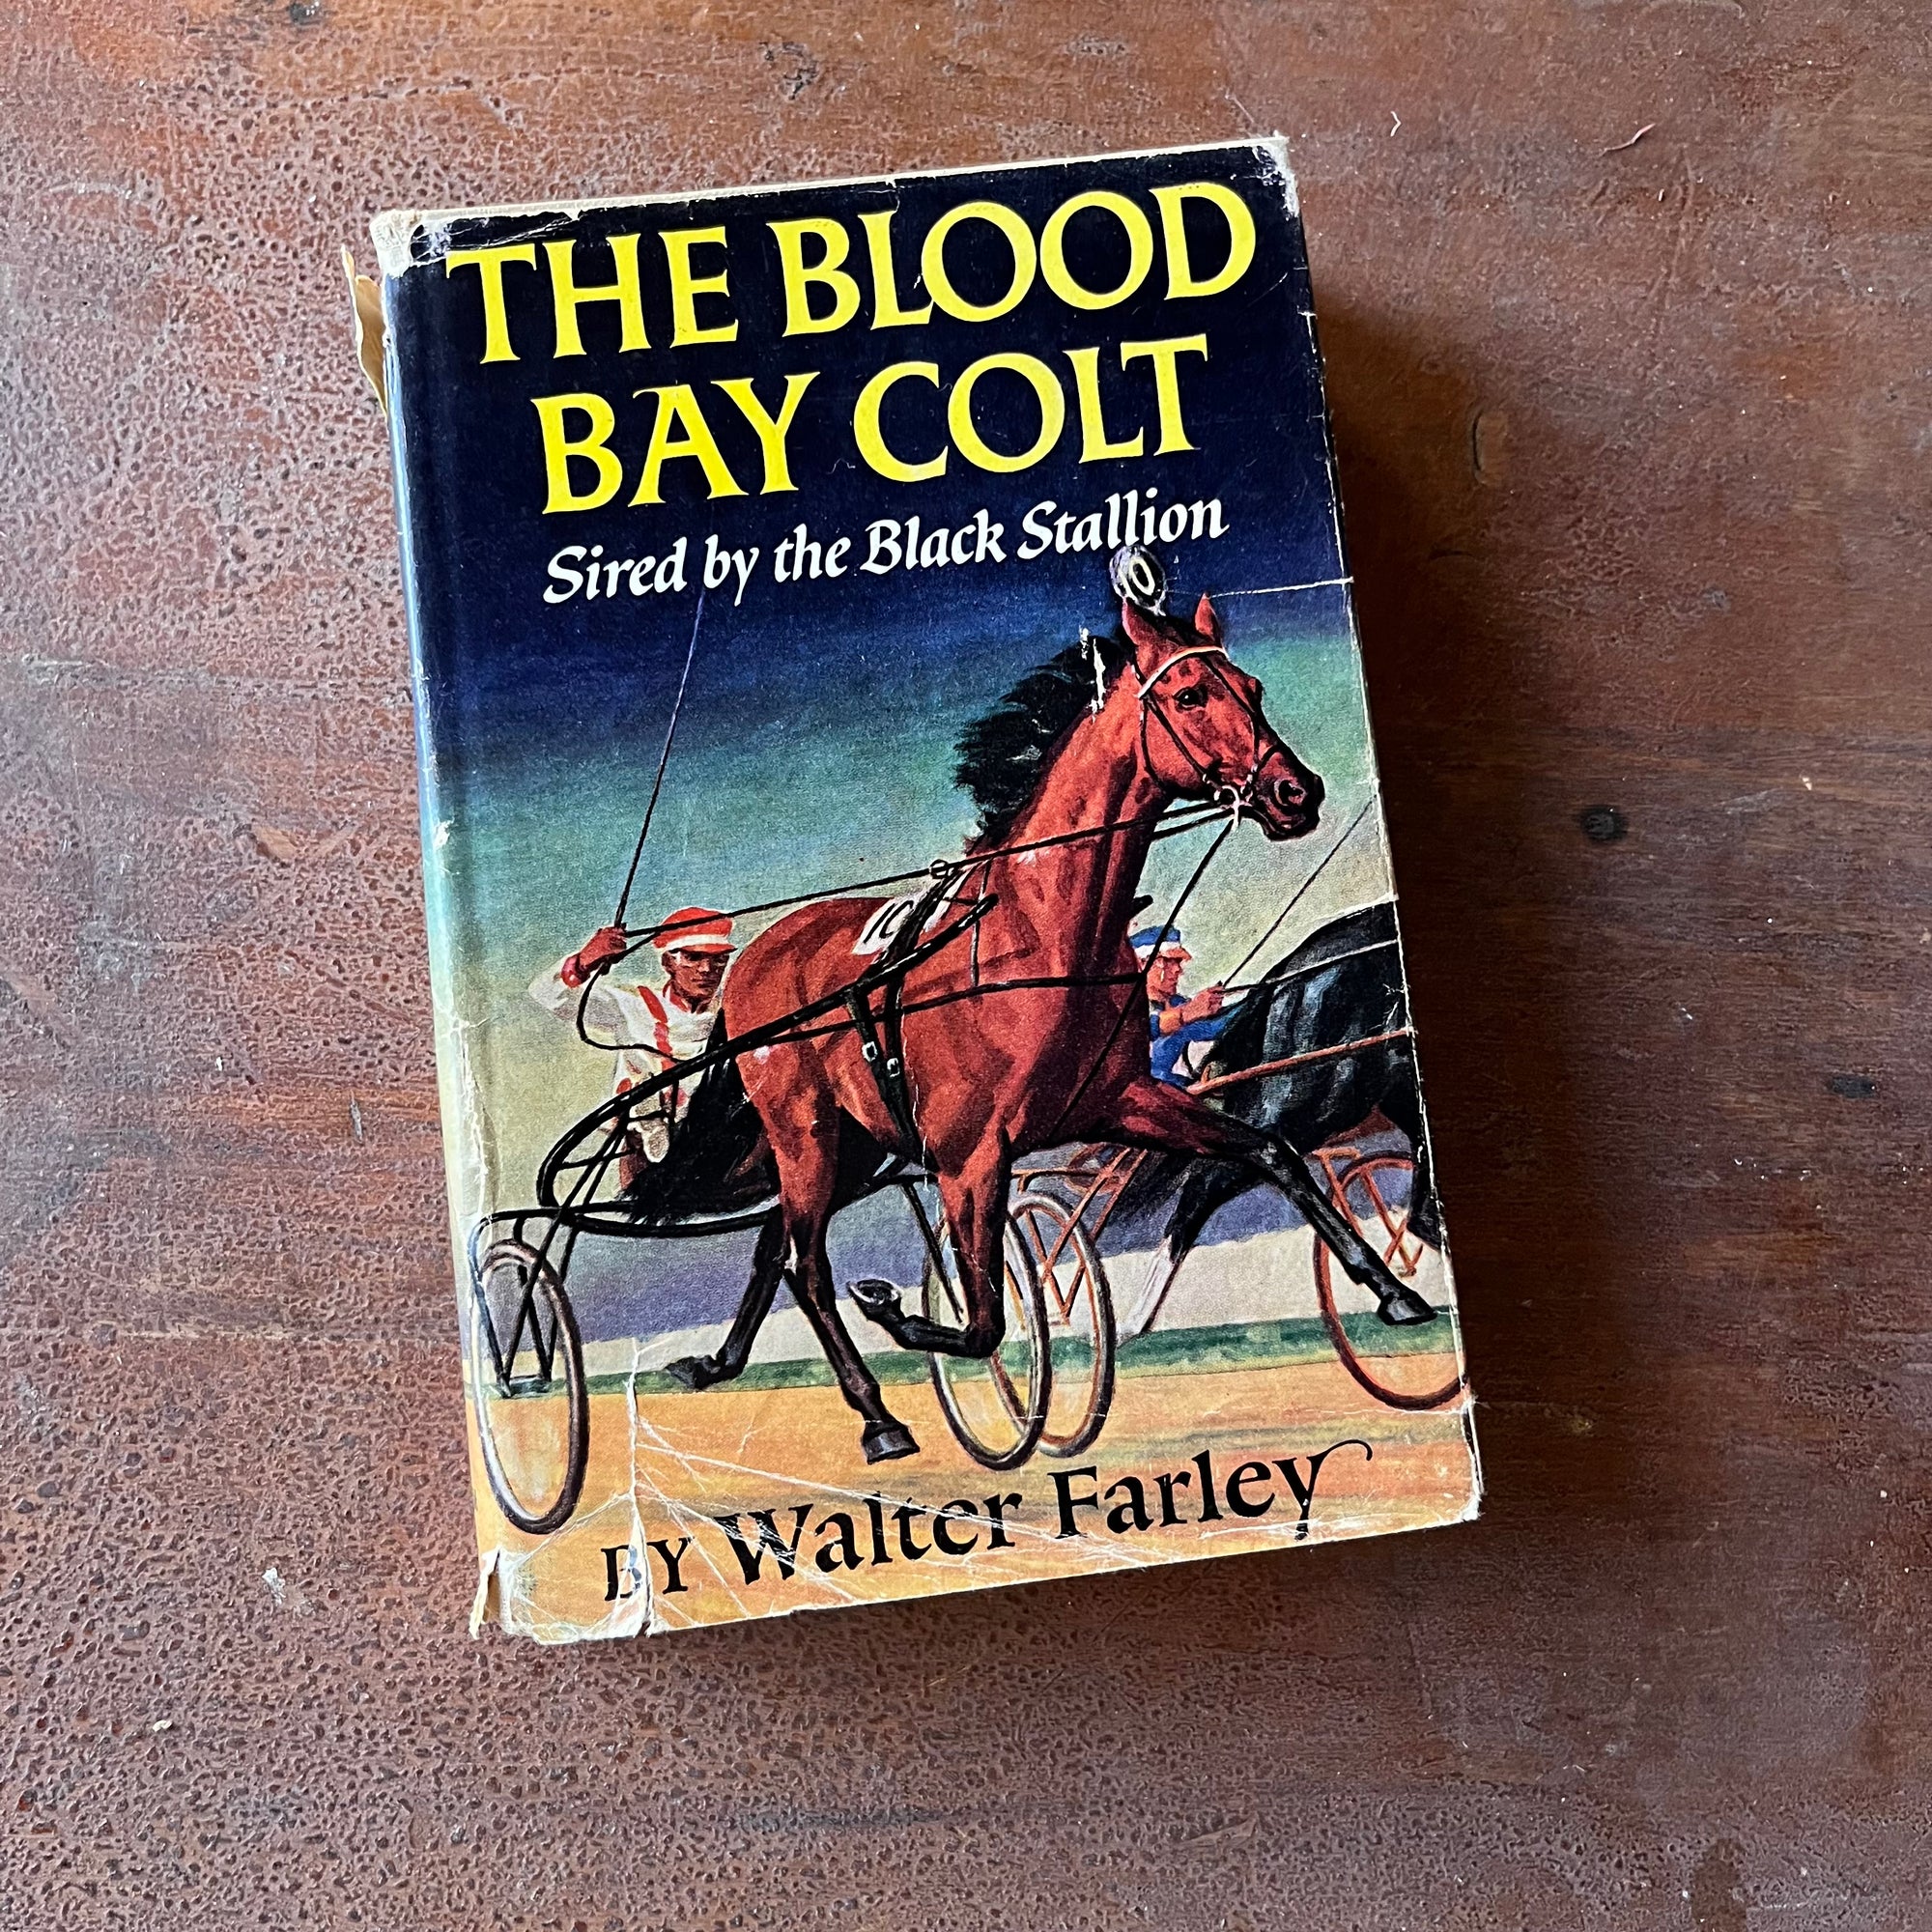 vintage children's chapter book, Black Stallion Book Series, vintage books about horses & horse racing - The Blood Bay Colt Sire by the Black Stallion written by Walter Farley with illustrations by Milton Menasco - view of the dust jacket's front cover with an illustration of the blood bay colt in a sulky race